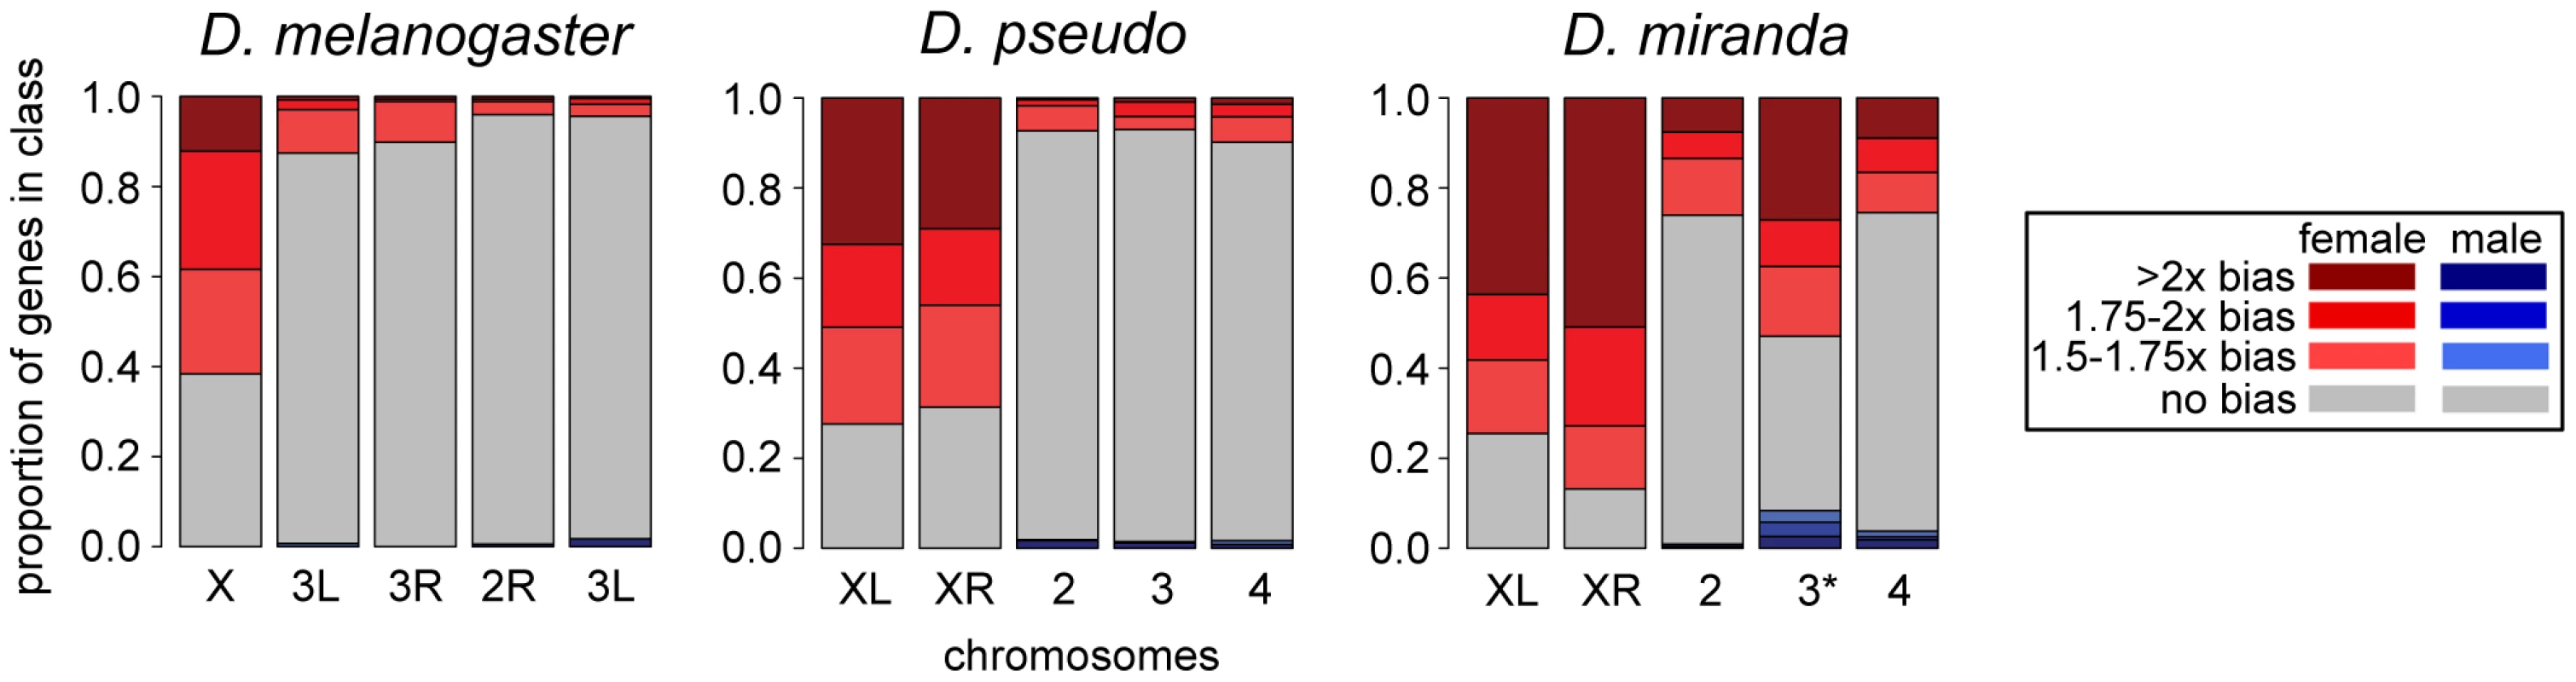 Sex-bias of transcripts in embryo at one timepoint across three species.